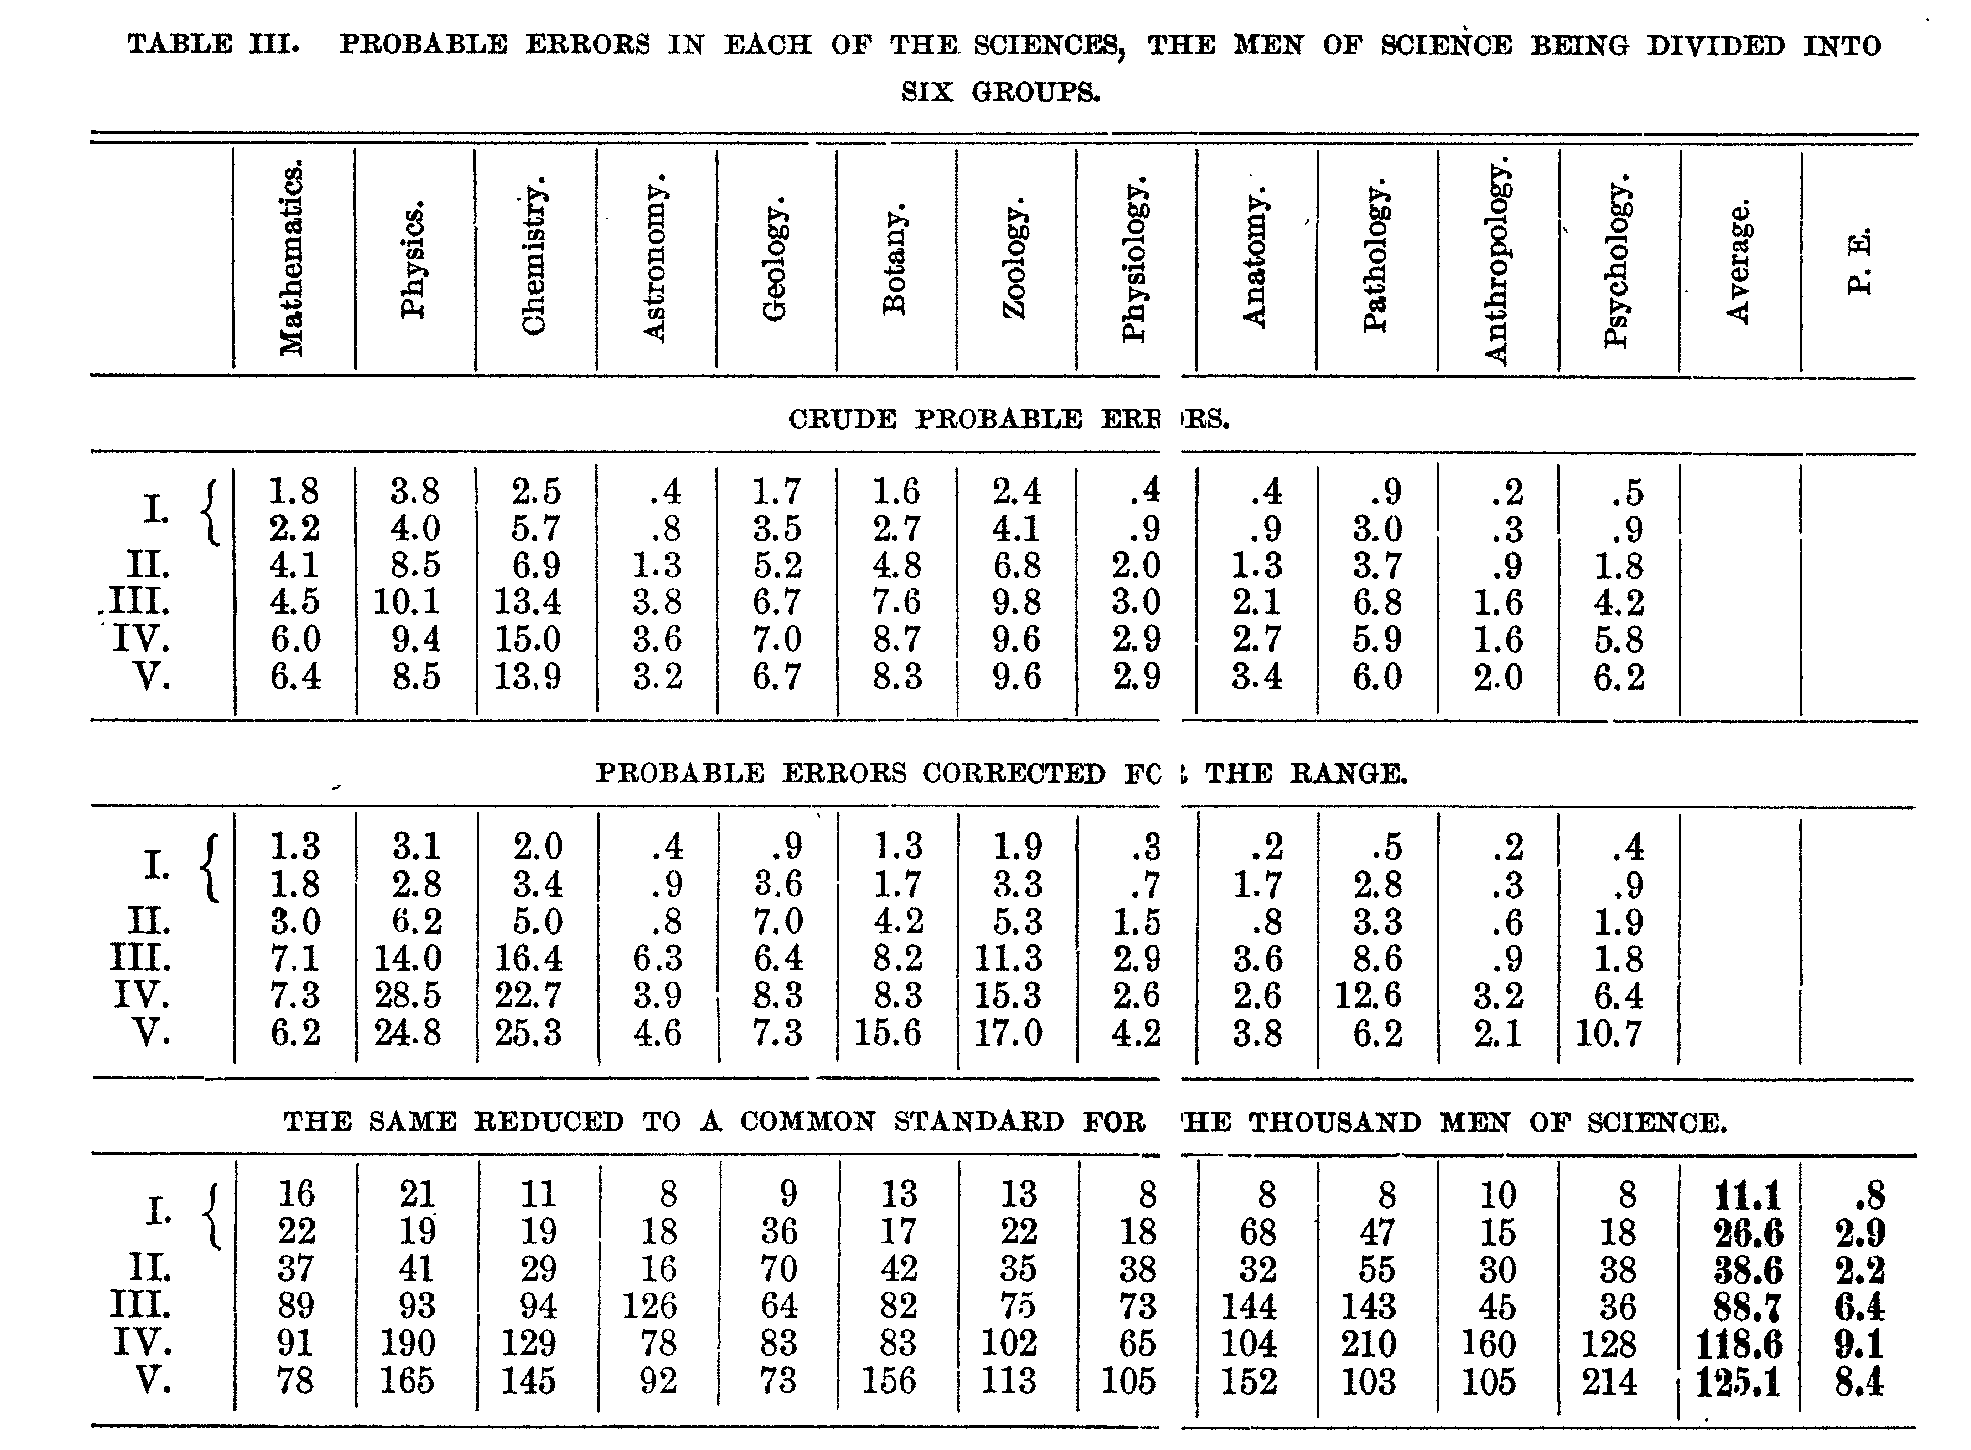 Table 3, Probable errors in each of the sciences, the men of science divided into six groups